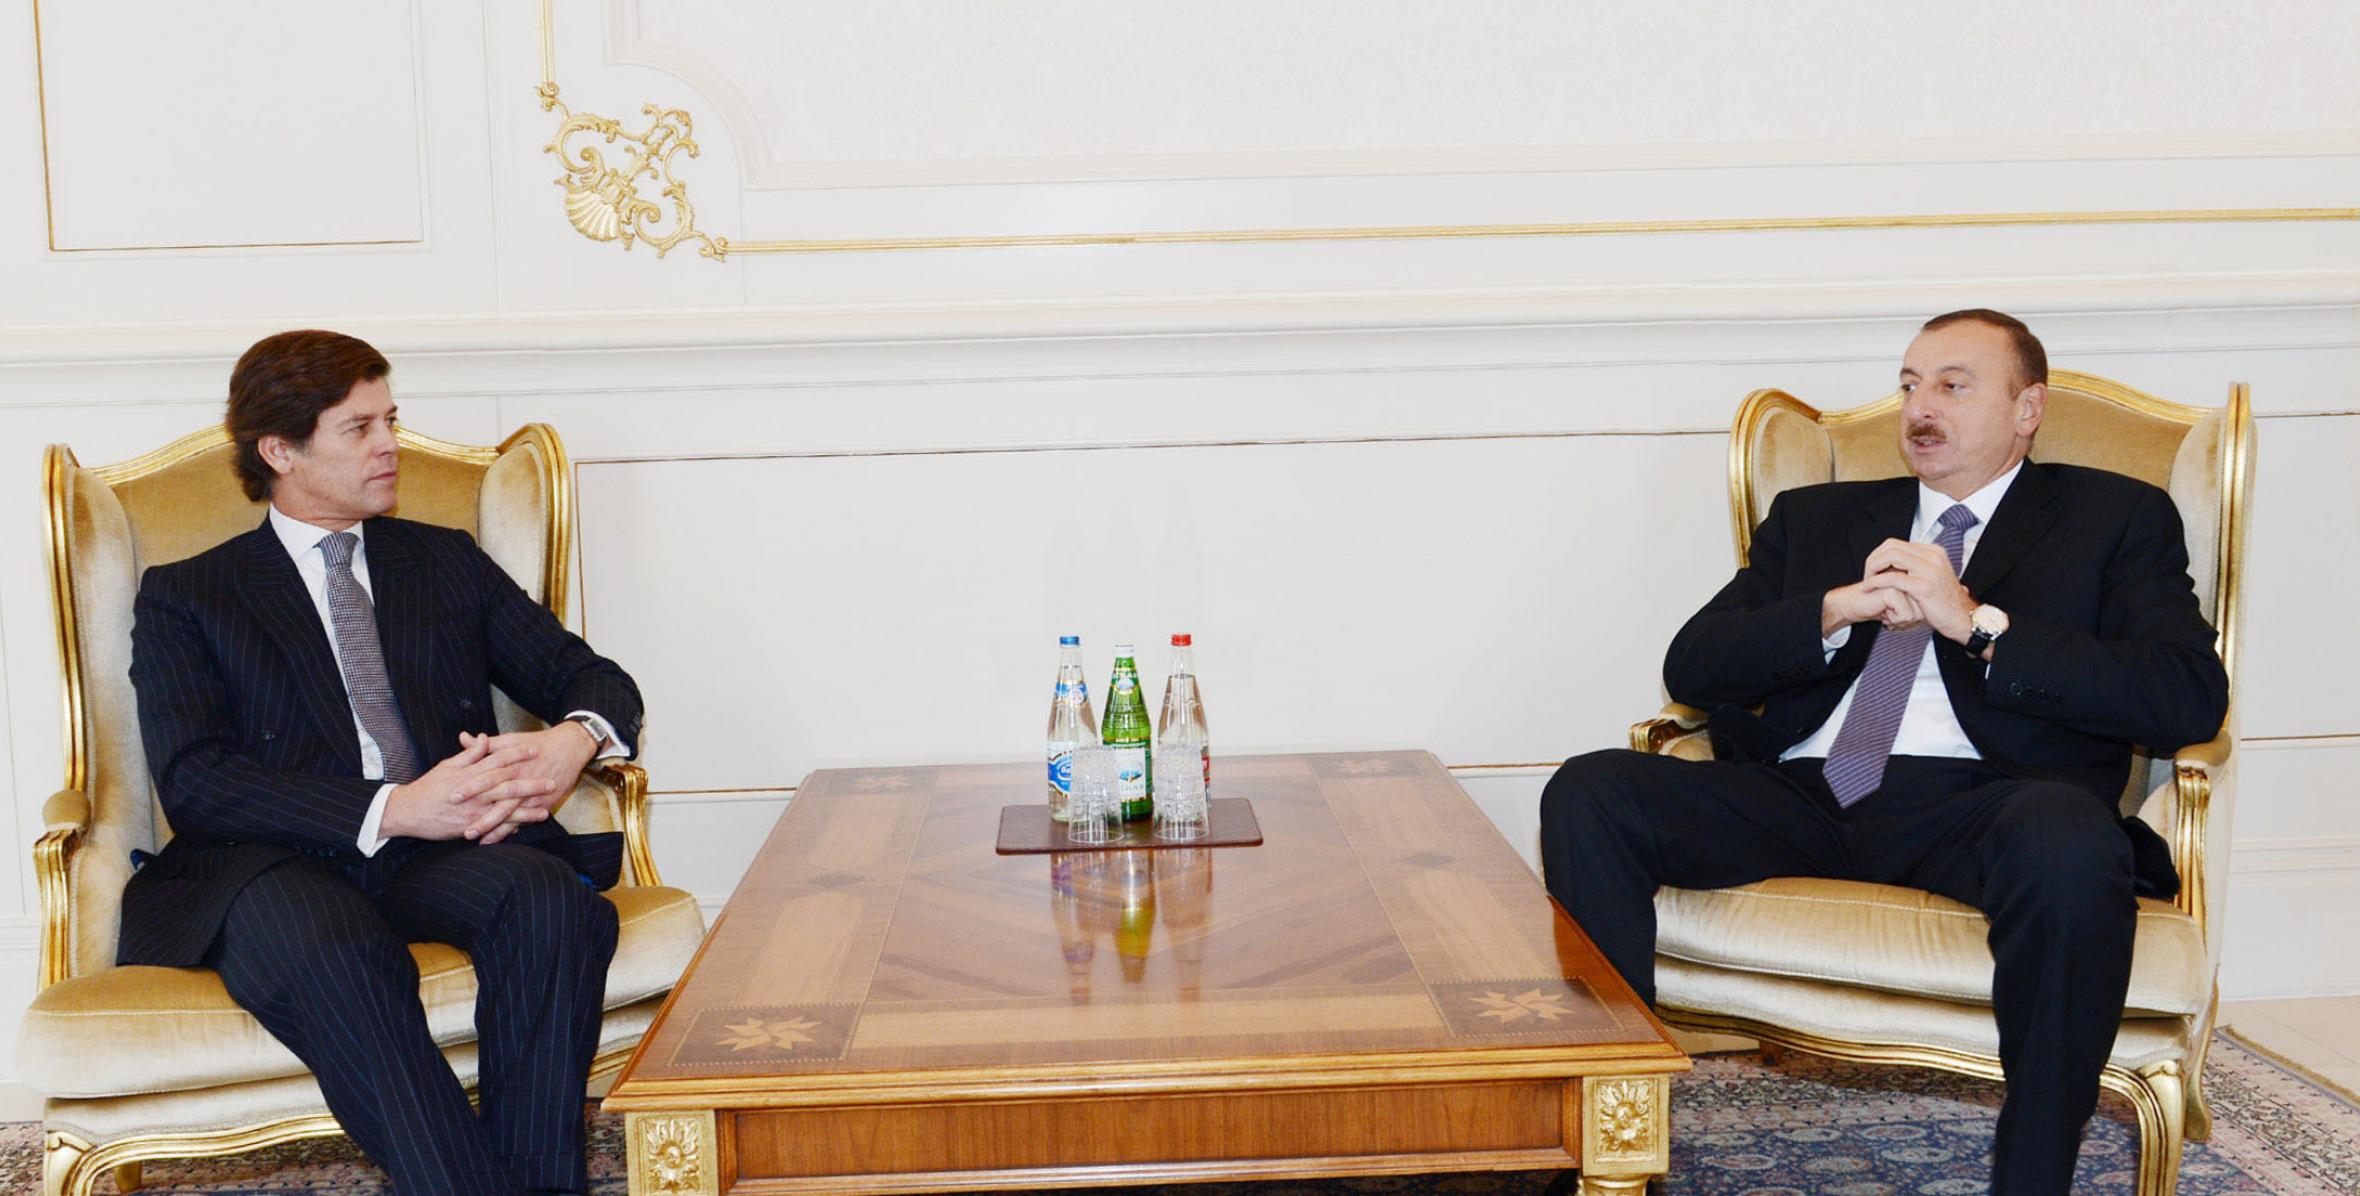 Ilham Aliyev accepted the credentials of a newly-appointed Ambassador Extraordinary and Plenipotentiary of Portugal to Azerbaijan